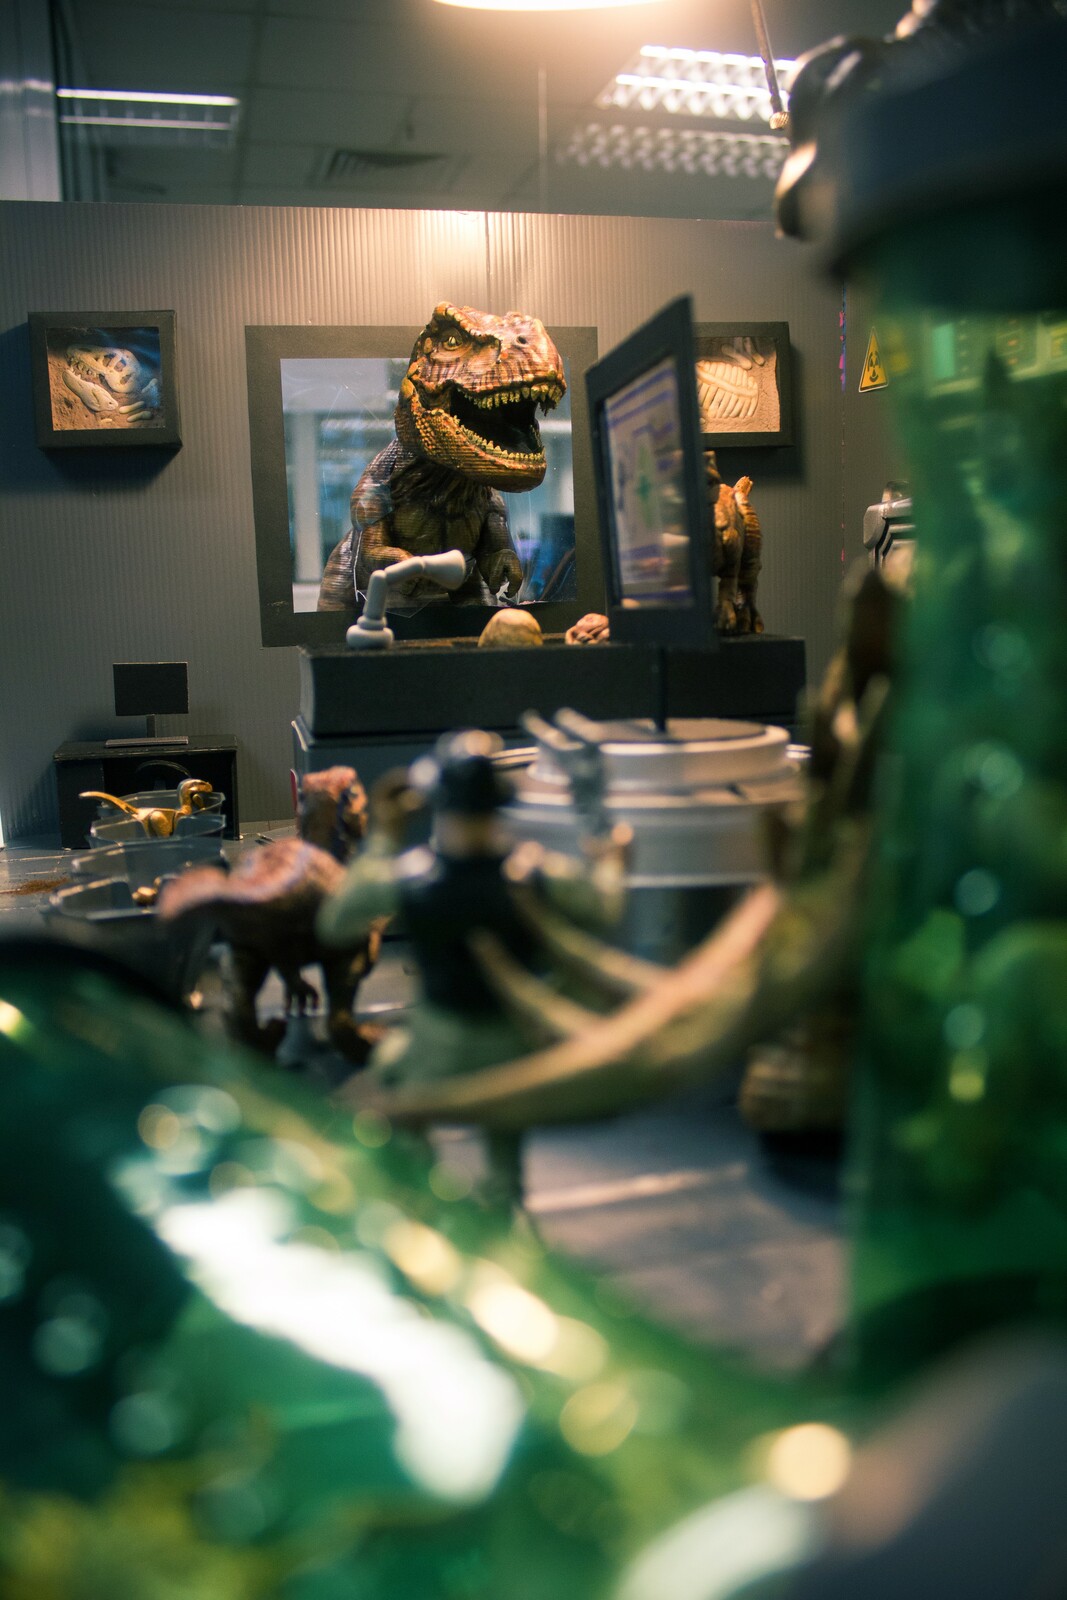 
The T-rex cracked the window and peeked inside!

The green cylinders were soda bottles.
